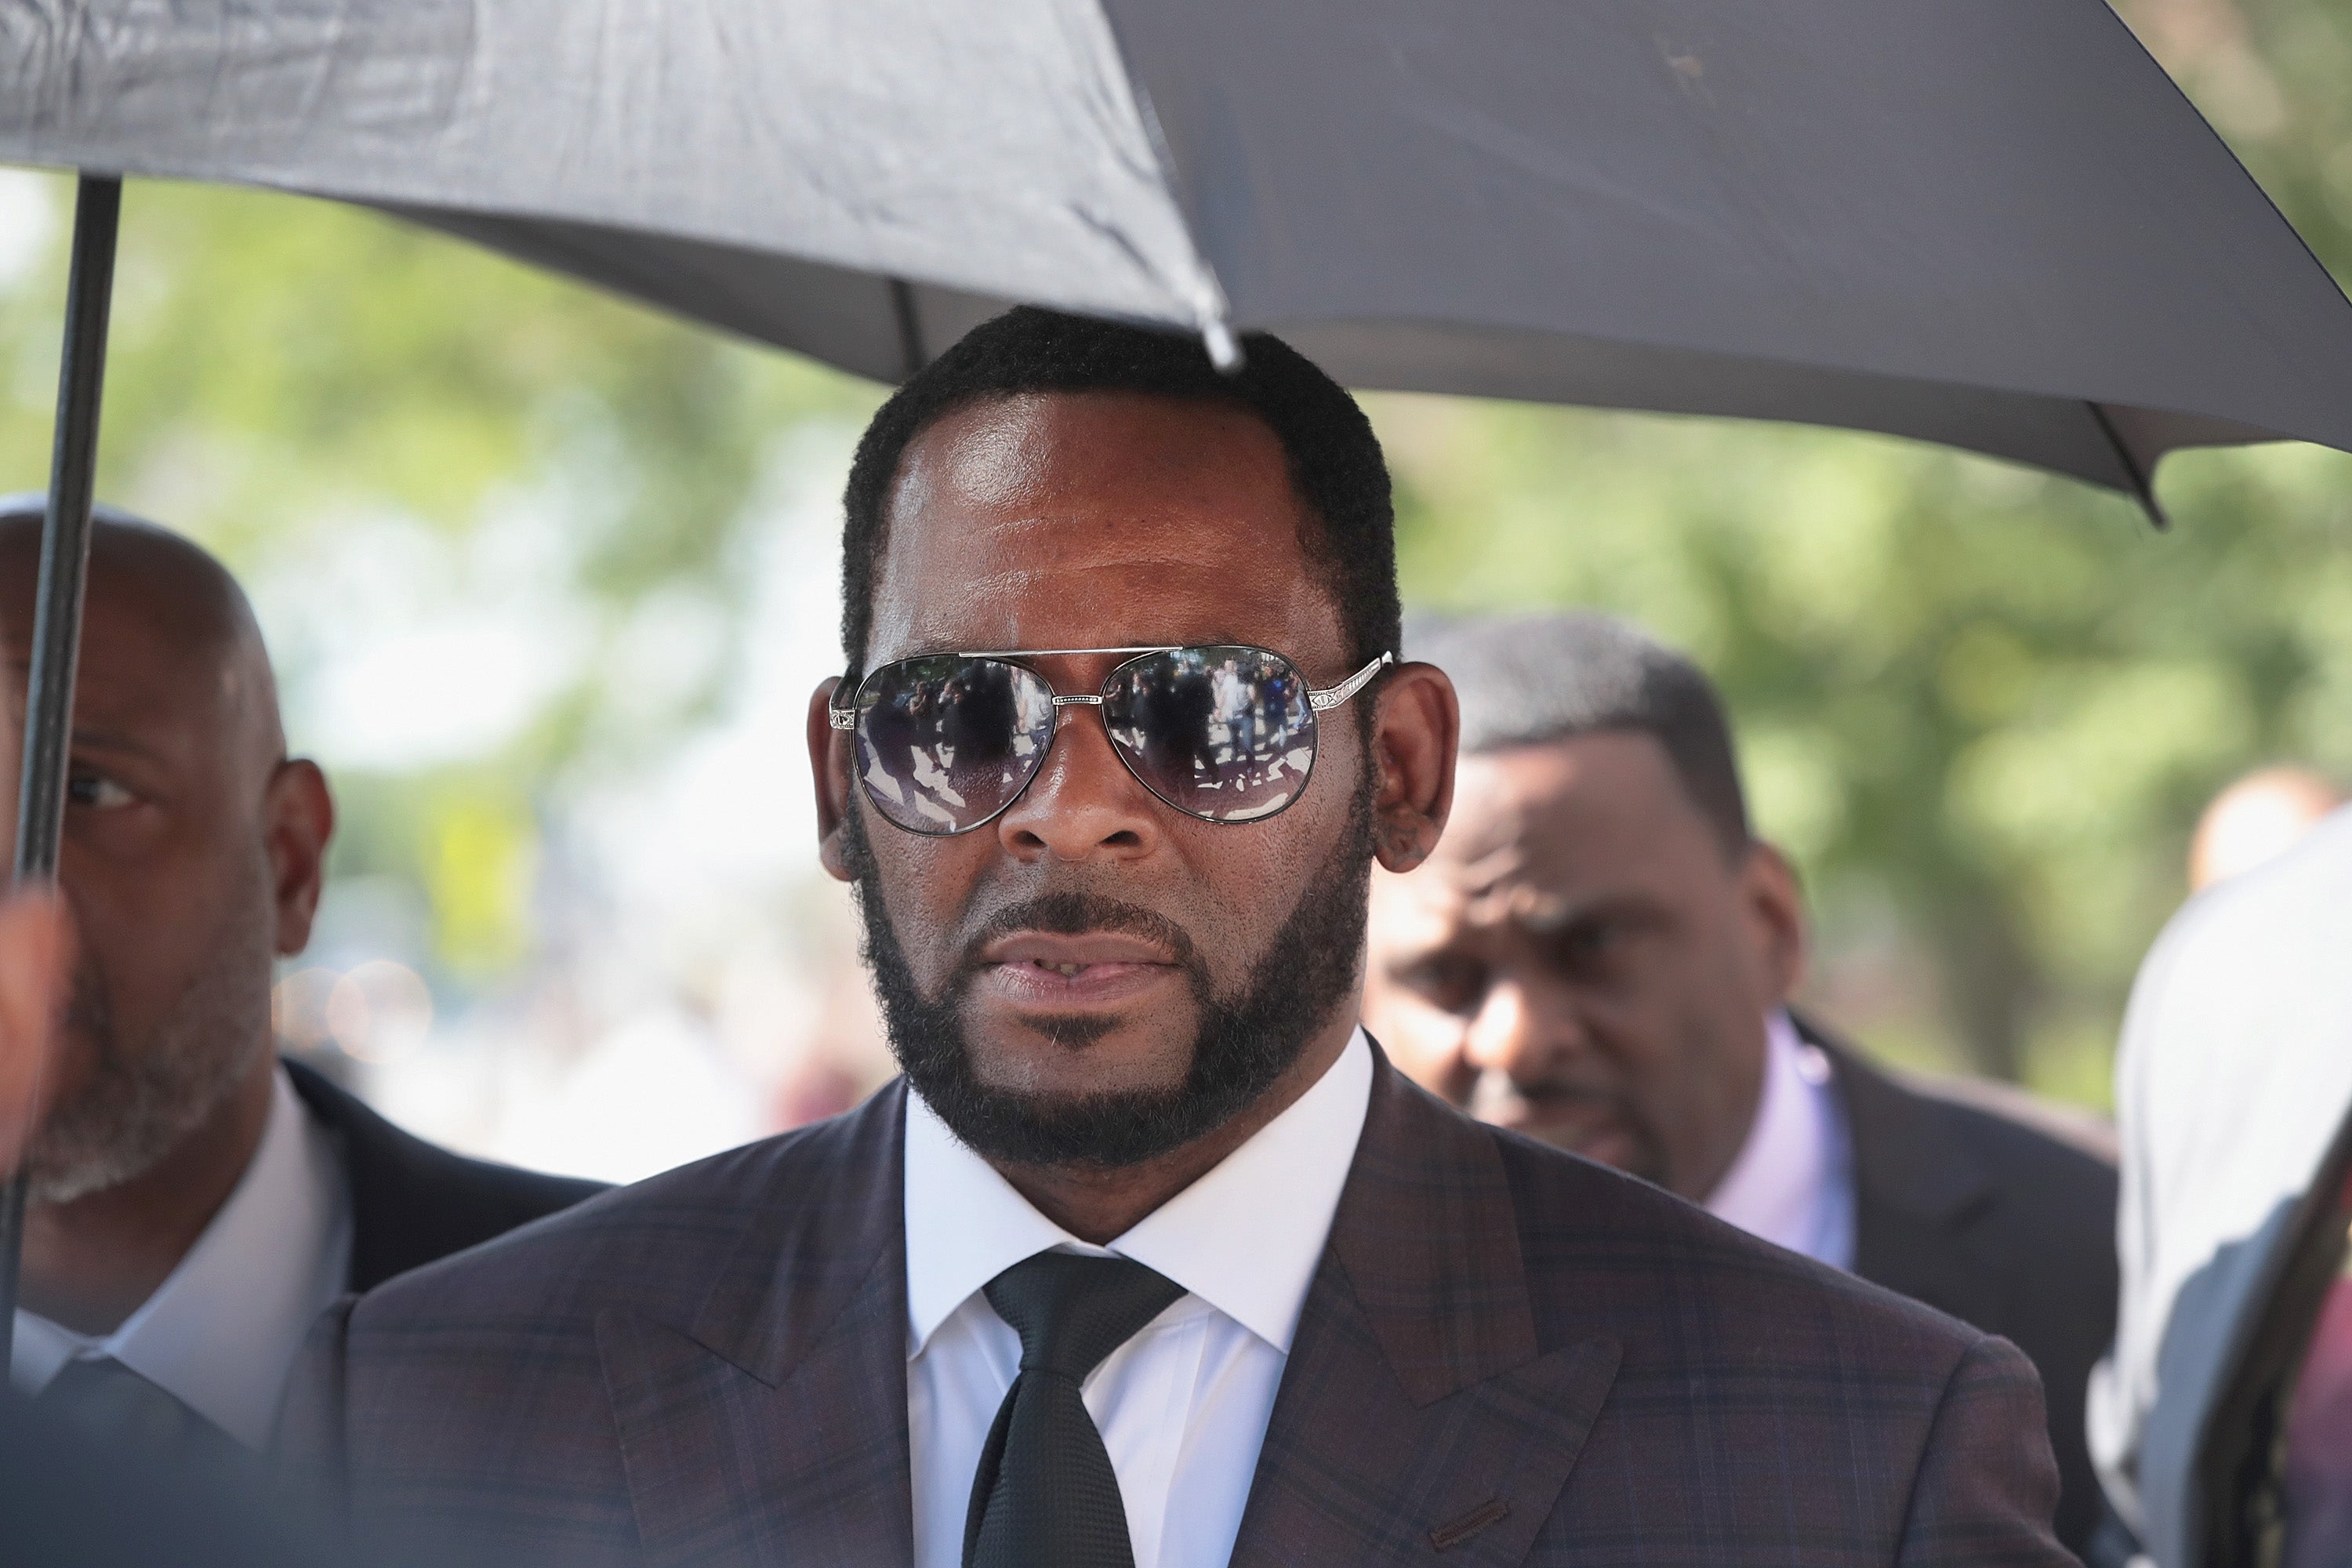 FILE: R&B singer R. Kelly leaves the Leighton Criminal Courts Building following a hearing on June 26, 2019 in Chicago, Illinois. Prosecutors turned over to Kelly's defense team a DVD that alleges to show Kelly having sex with an underage girl in the 1990s. Kelly has been charged with multiple sex crimes involving four women, three of whom were underage at the time of the alleged encounters.